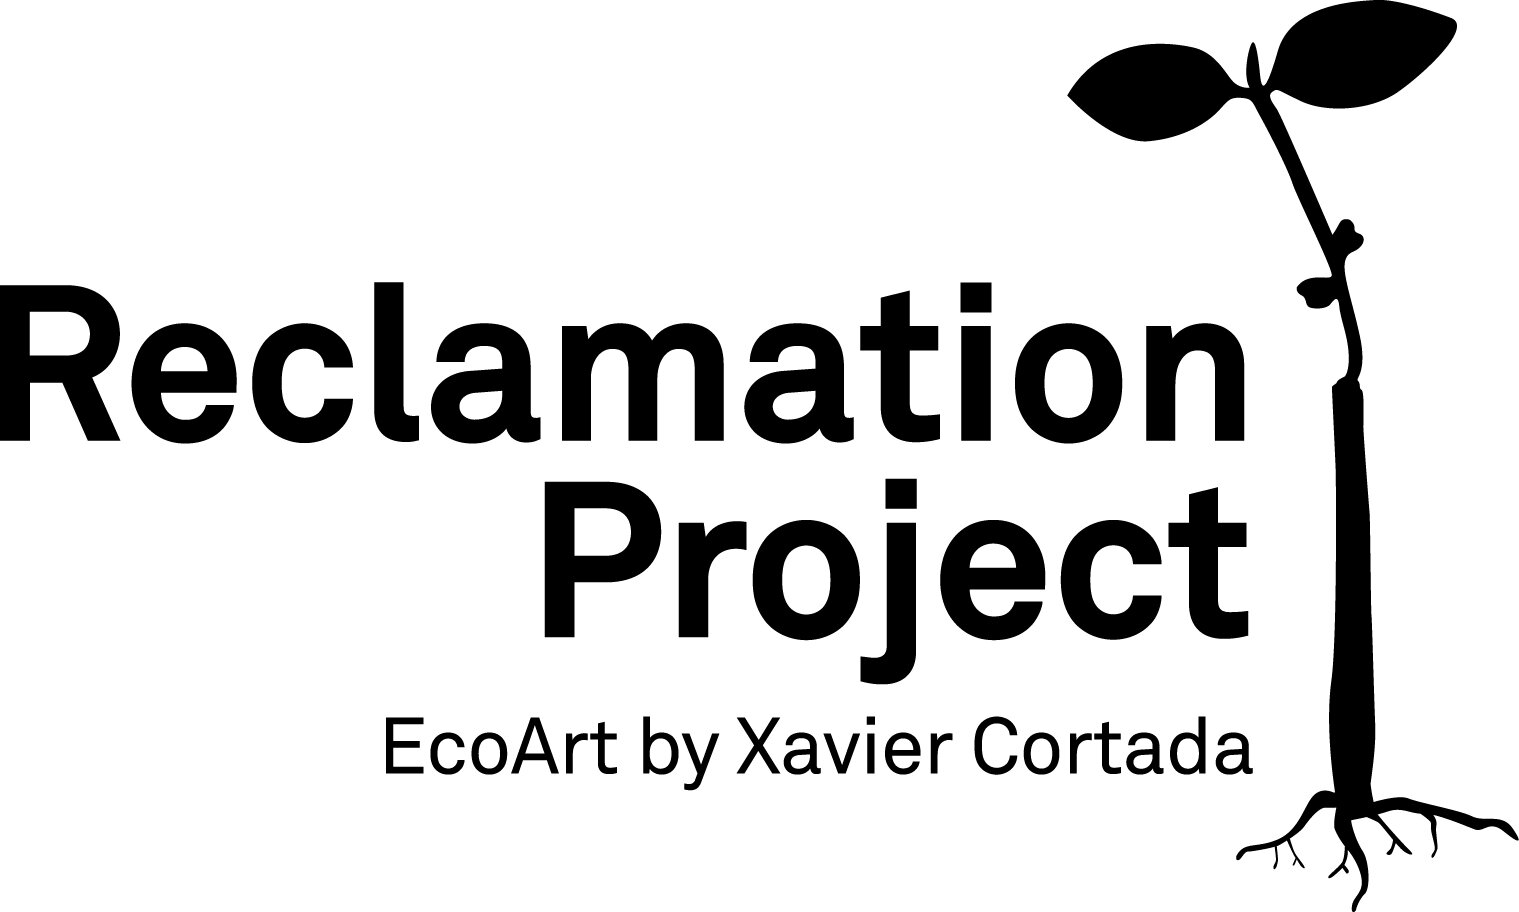 Reclamation Project logo